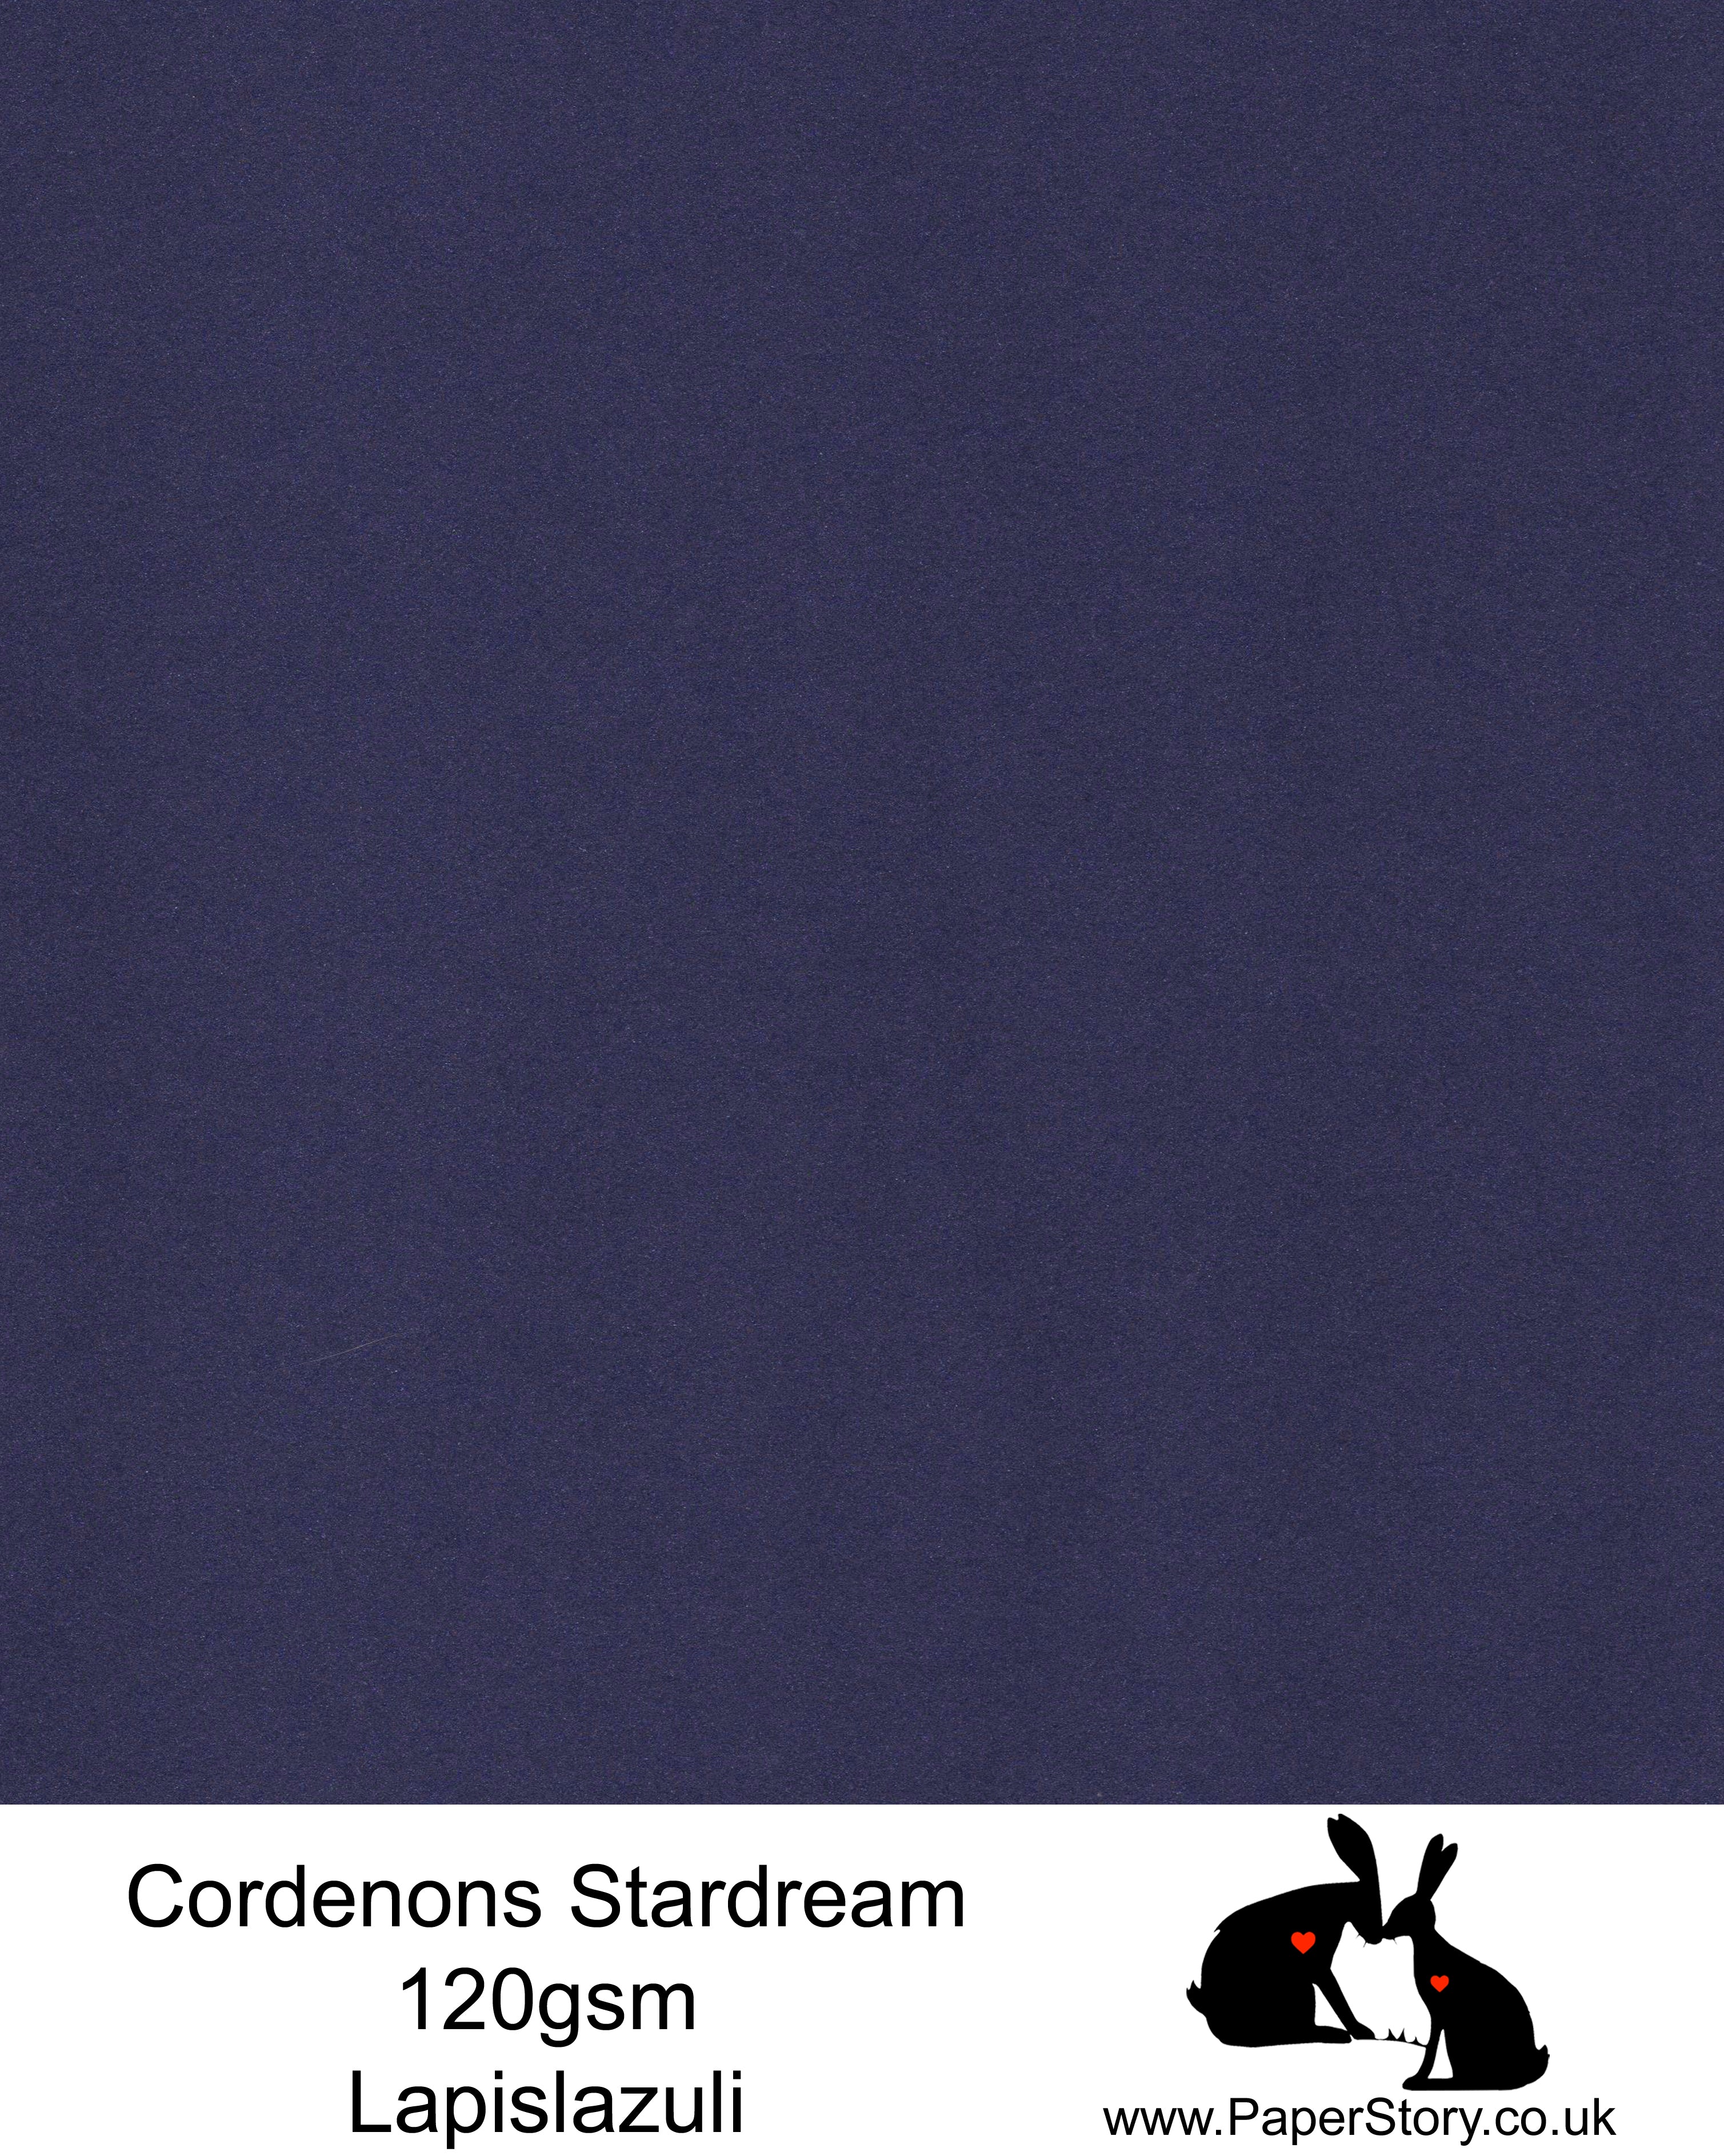 A4 Stardream 120gsm paper for Papercutting, craft, flower making  and wedding stationery. Blue Lapislazuli , sparkles like the night sky, deep blue colour. Stardream is a luxury Italian paper from Italy, it is a double sided quality Pearlescent paper with a matching colour core. FSC Certified, acid free, archival and PH Neutral